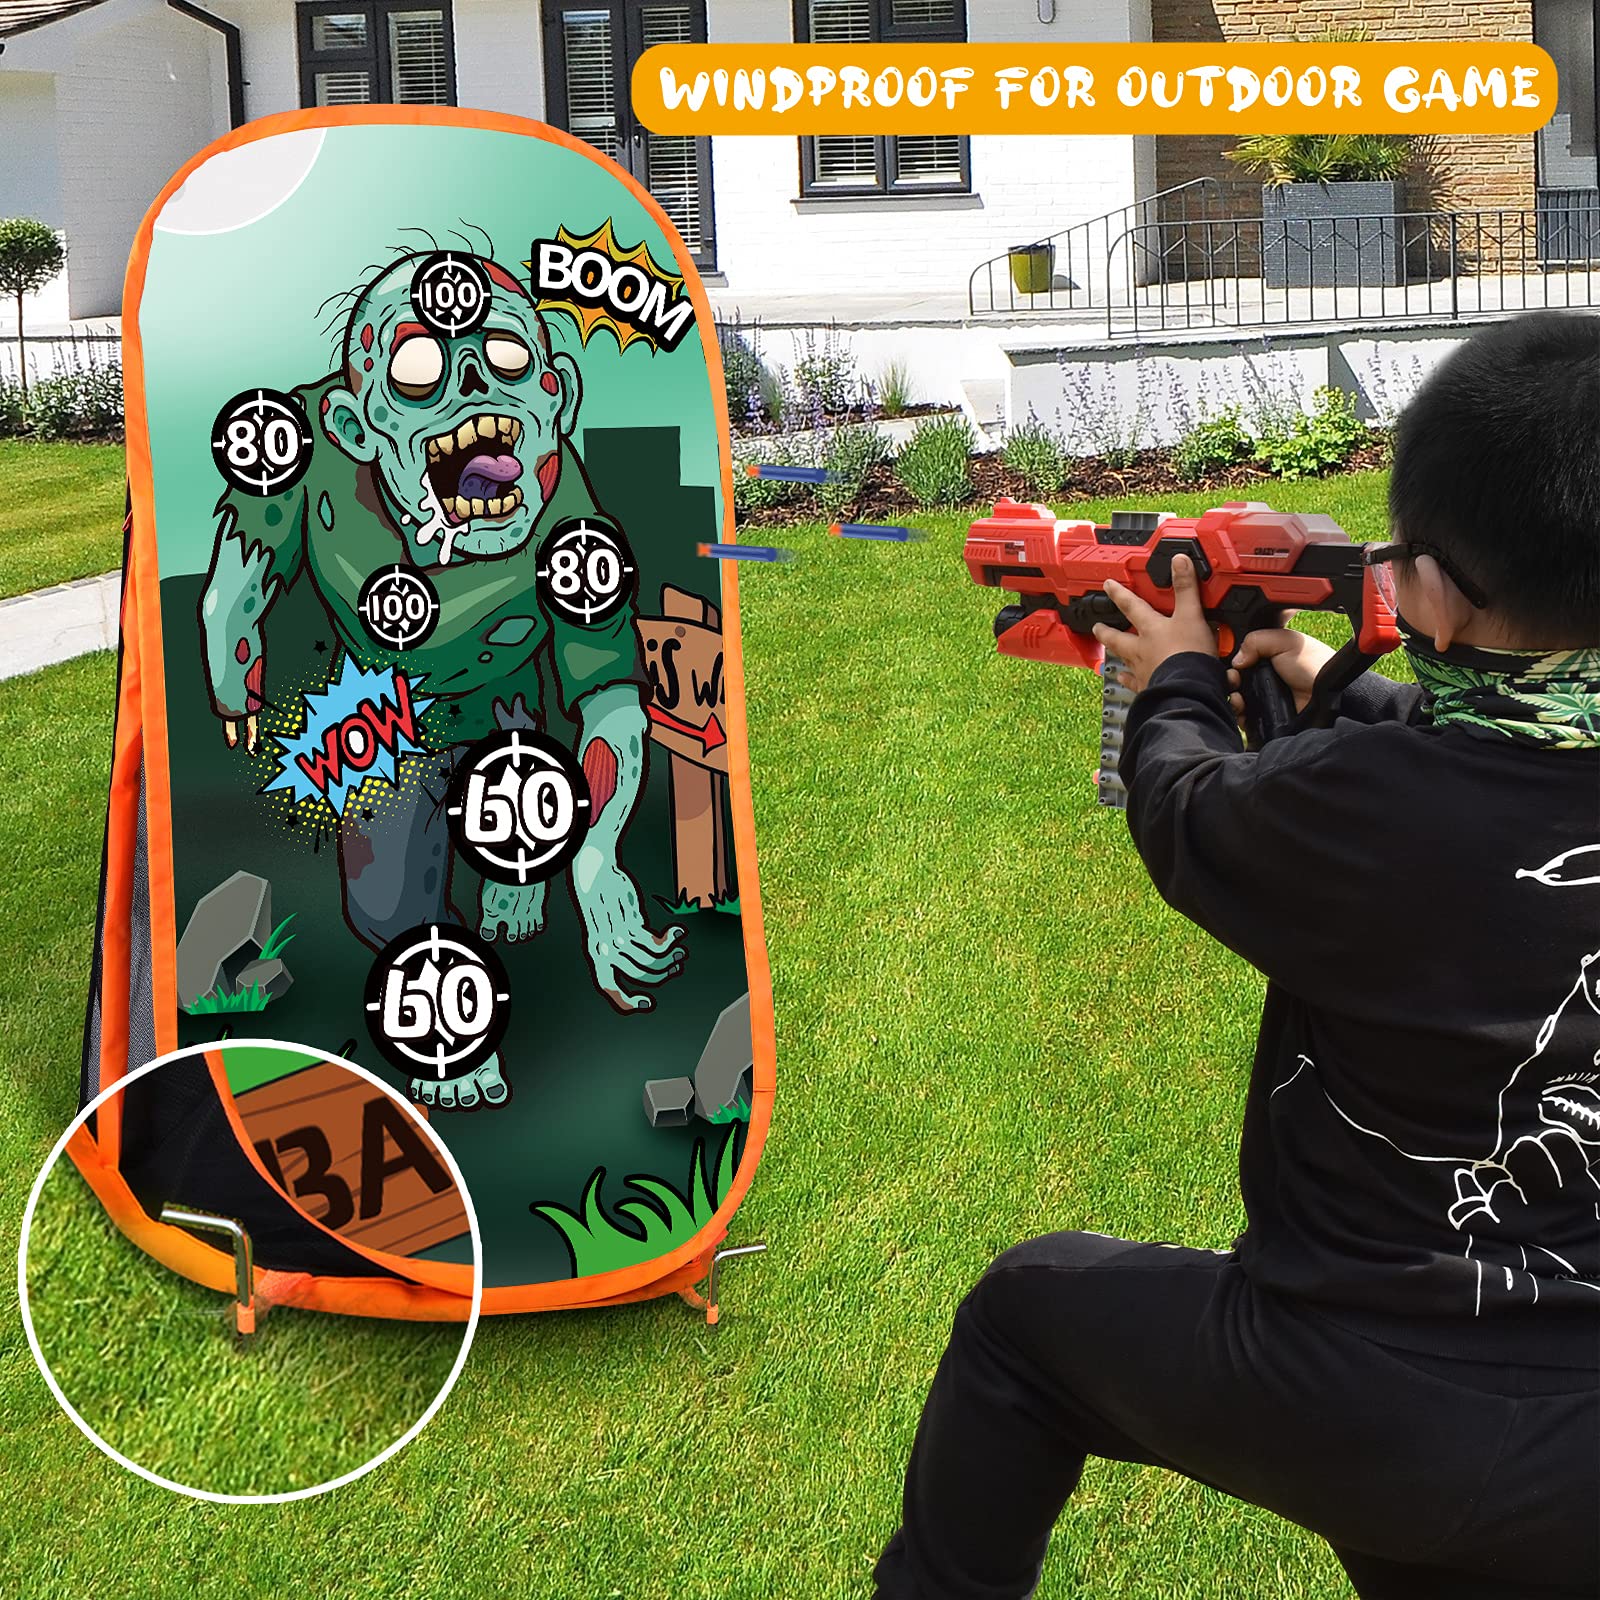 RONSTONE Shooting Practice Target Compatible with Nerf Gun for Boys Girls, Toy Foam Blaster Shooting Targets for Kids Indoor Outdoor, Zombie Shooting Target with Storage Net